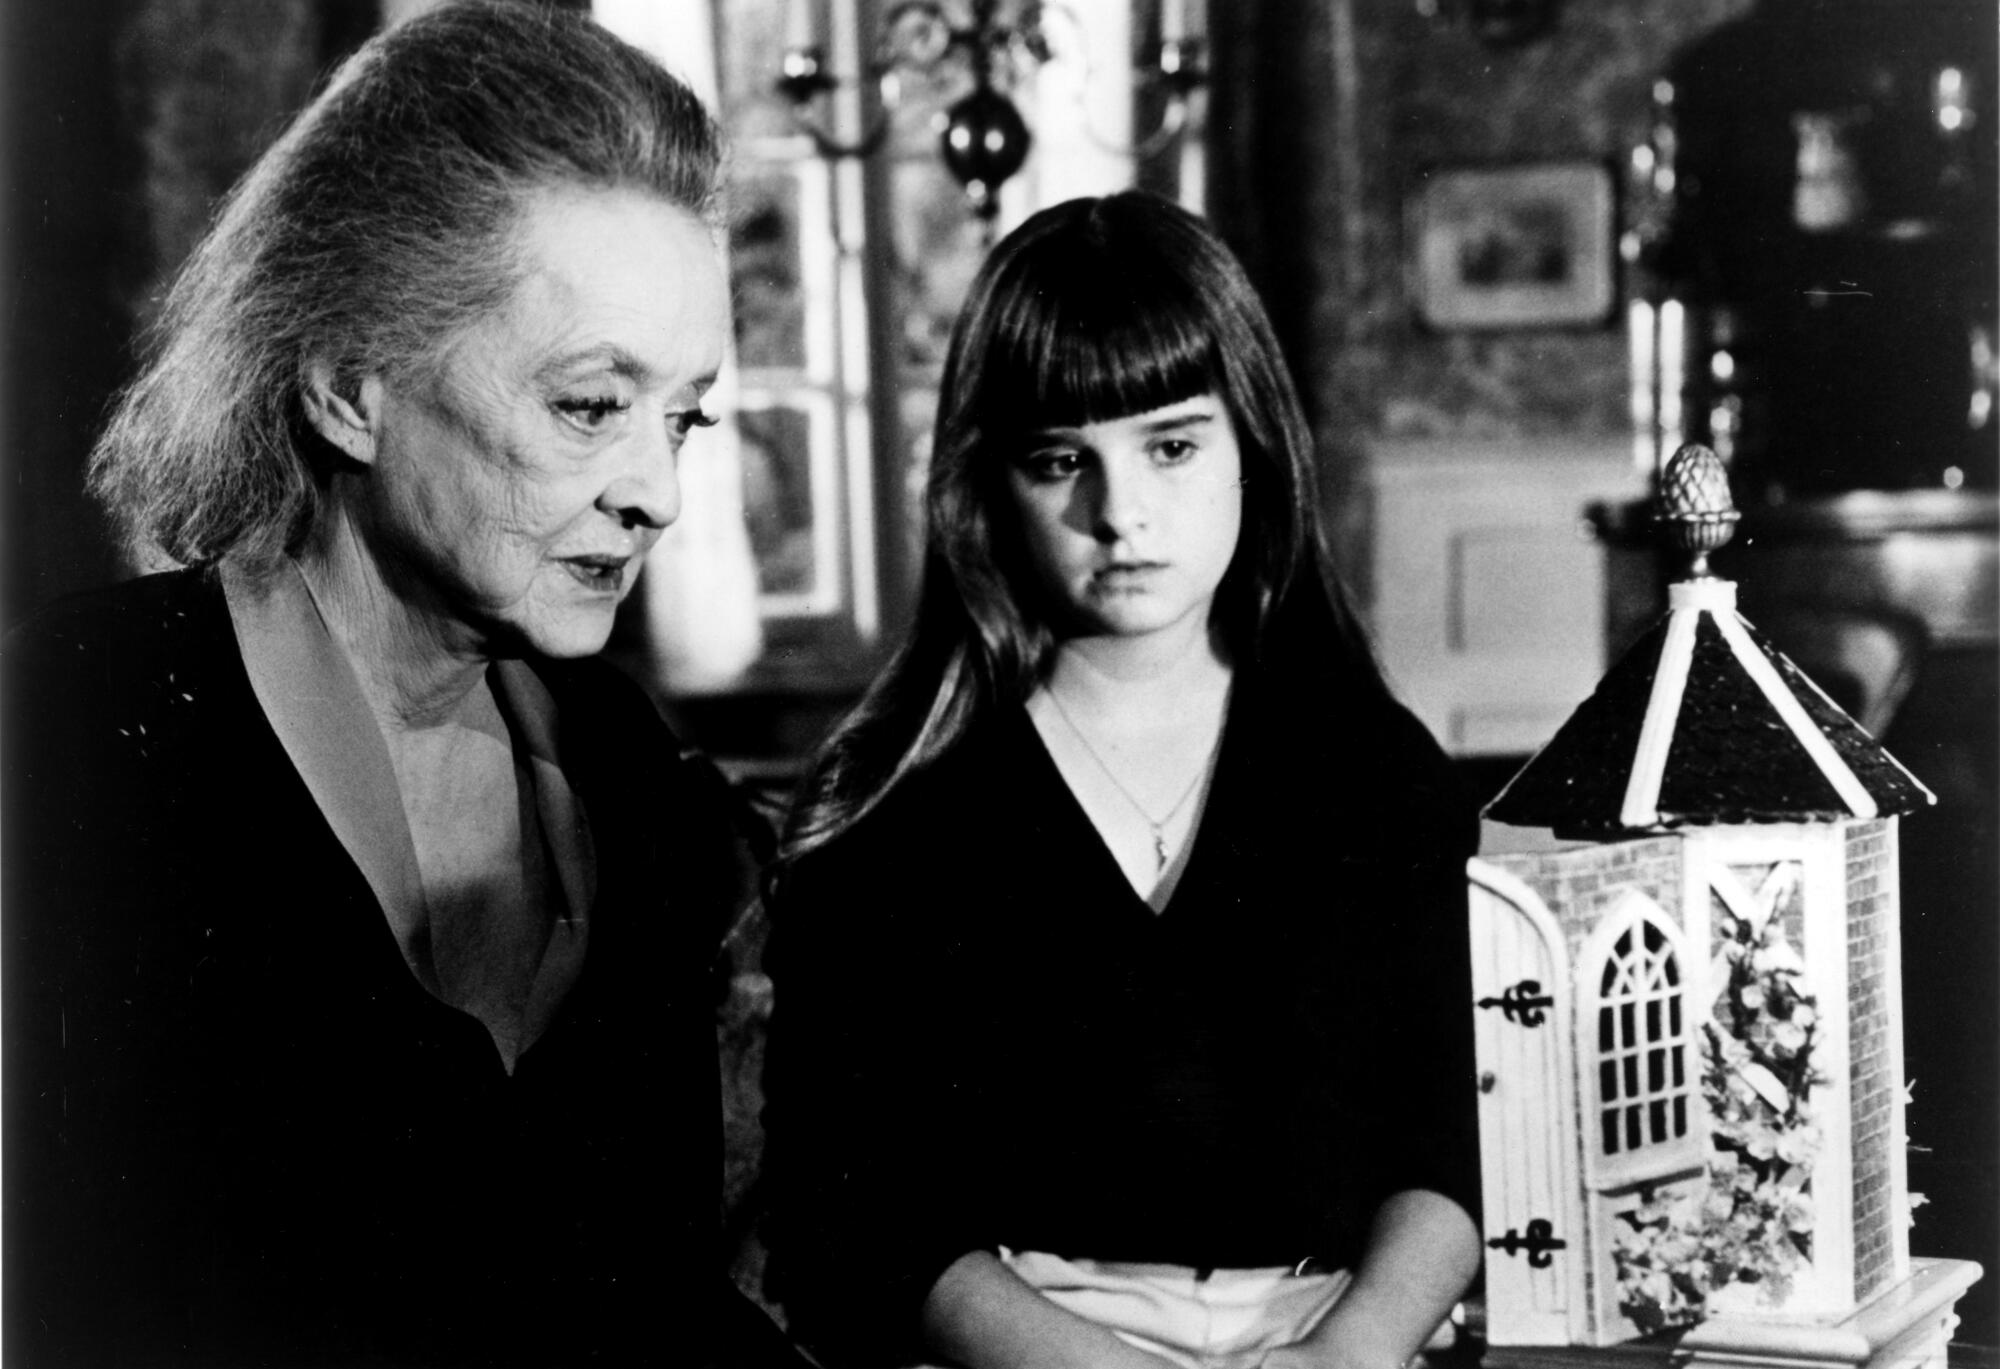 Bette Davis, left, with Kyle Richards in the 1980 film "The Watcher in the Woods."